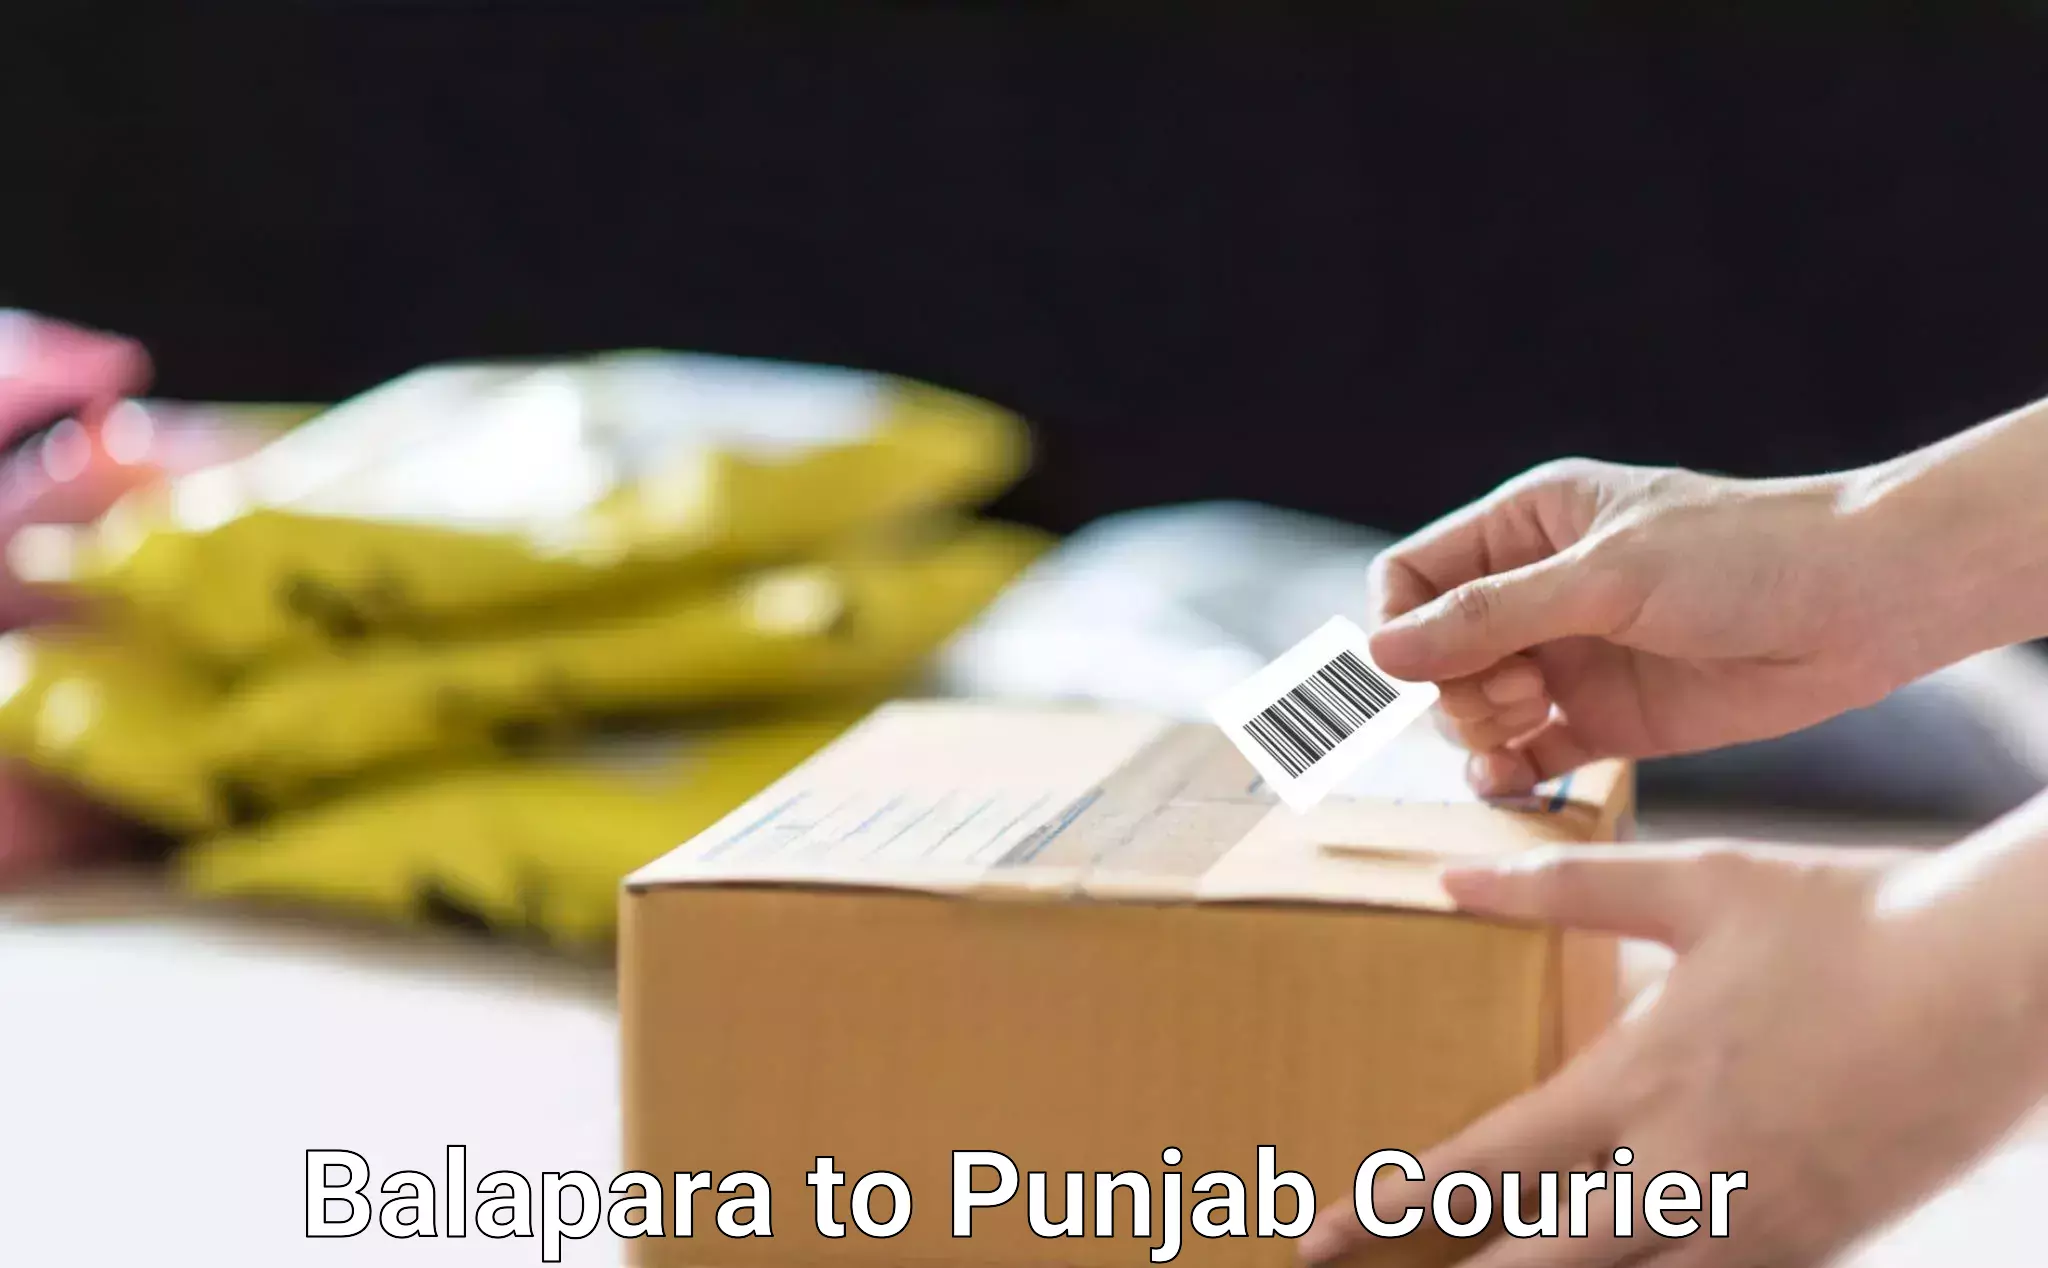 State-of-the-art courier technology Balapara to Gurdaspur